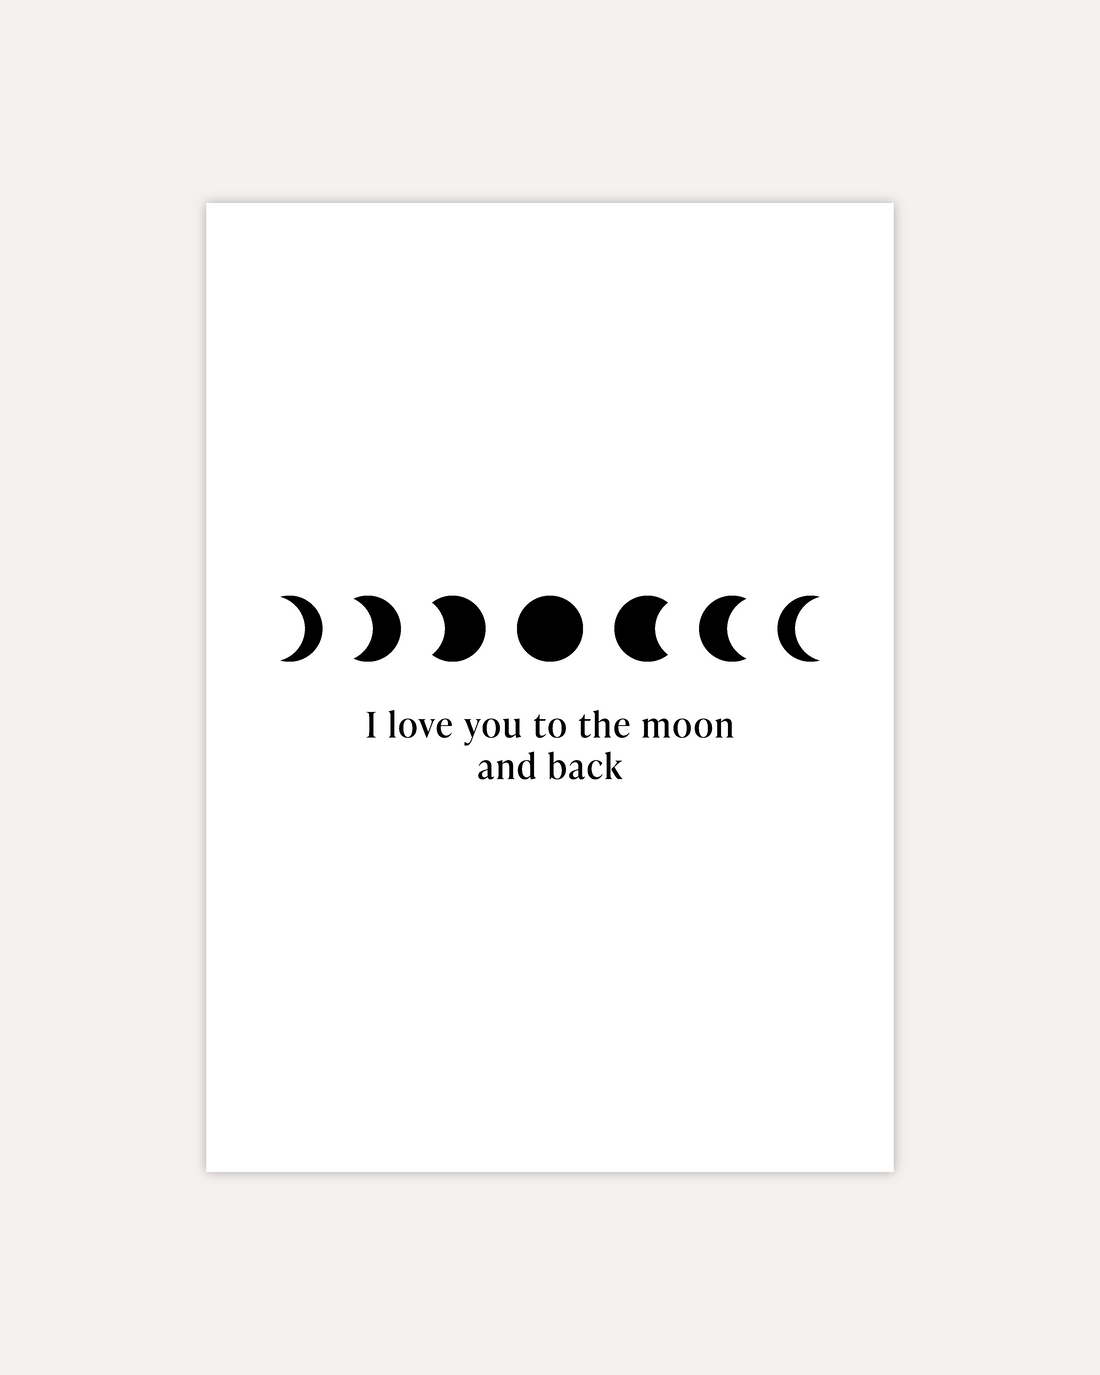 A postcard design showing simple black symbols of moon phases arranged in a horizontal line with some text below them saying &quot;I love you to the moon and back&quot;. The design is shown on a beige background.